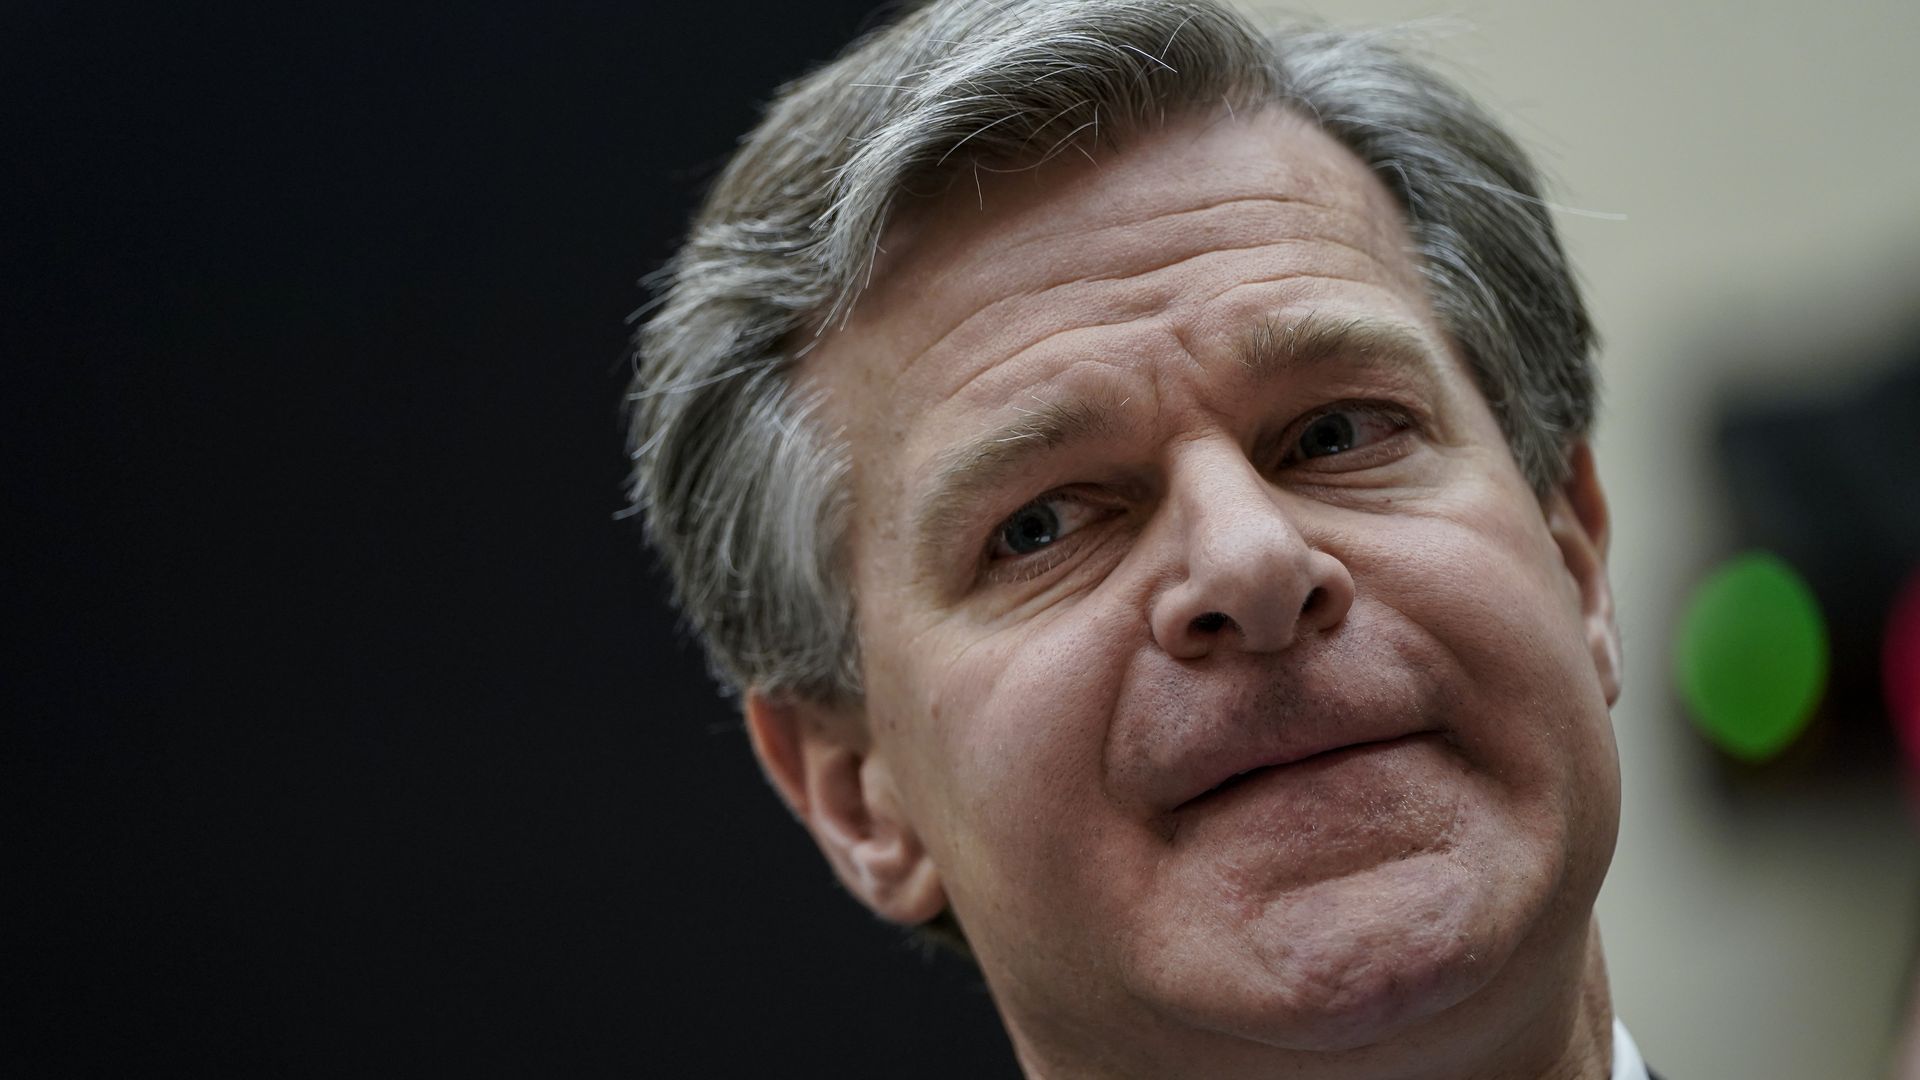 Upclose photo of Christopher Wray